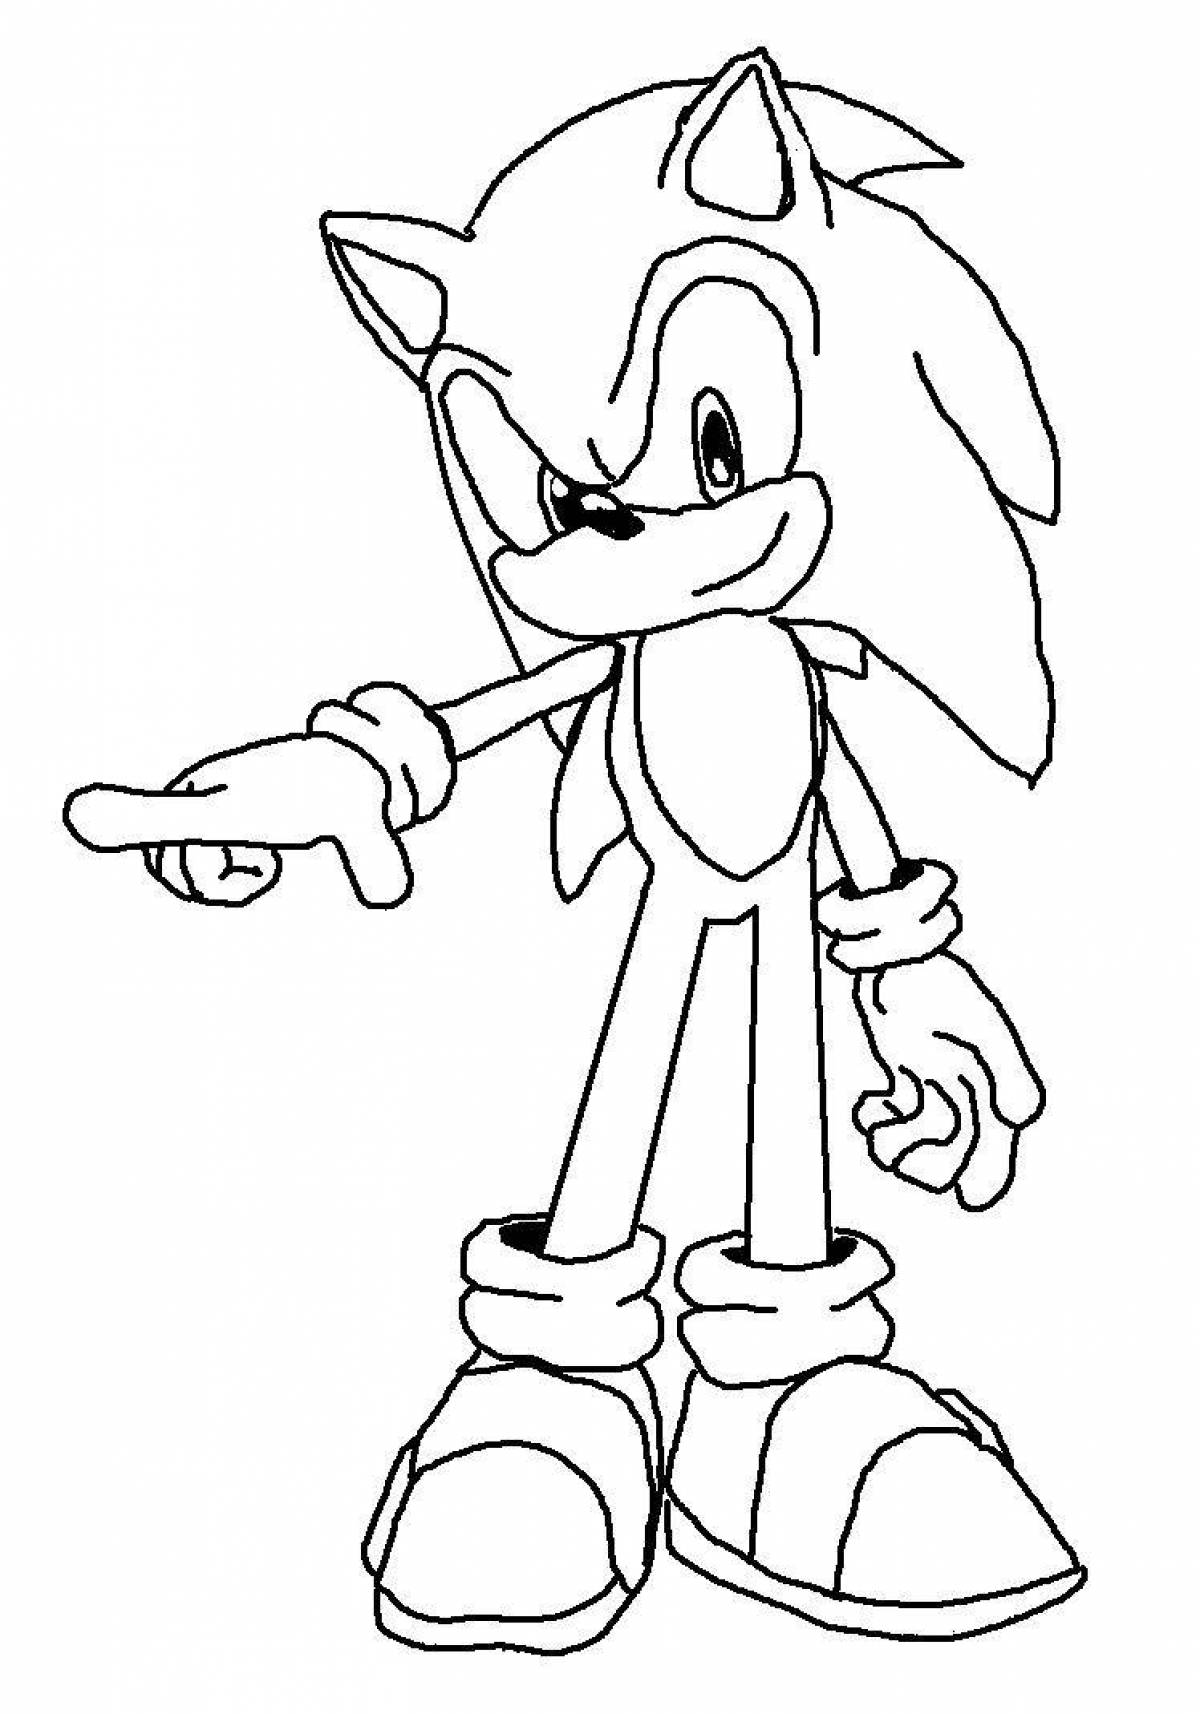 Colorful yellow sonic coloring page